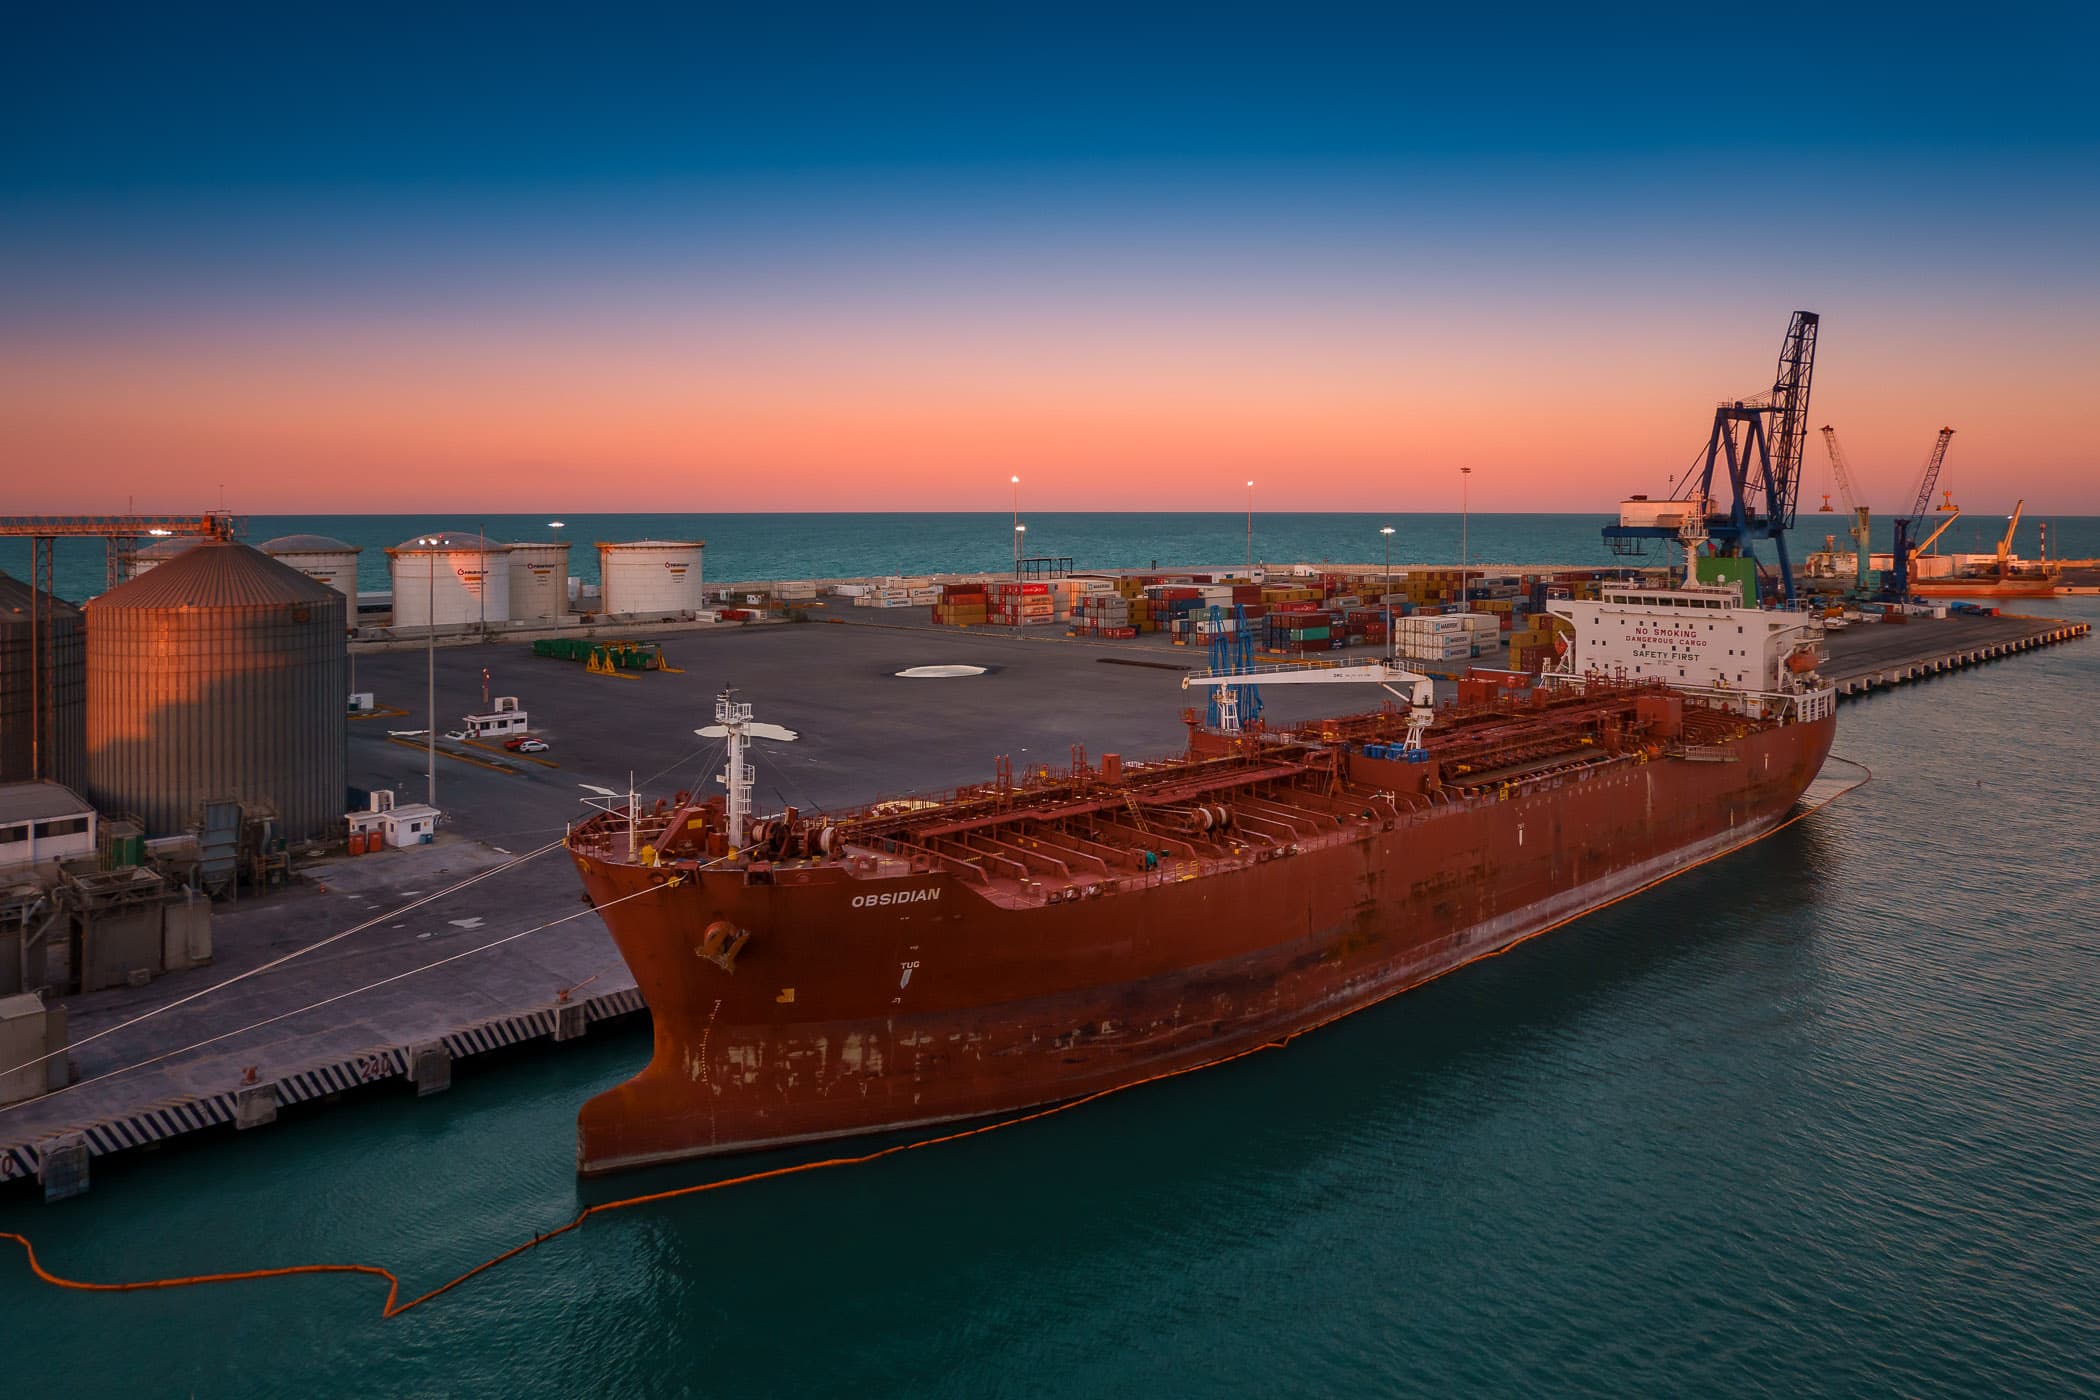 The chemical tanker Obsidian, docked in the evening sun at the Terminal Remota, Progreso, Mexico.